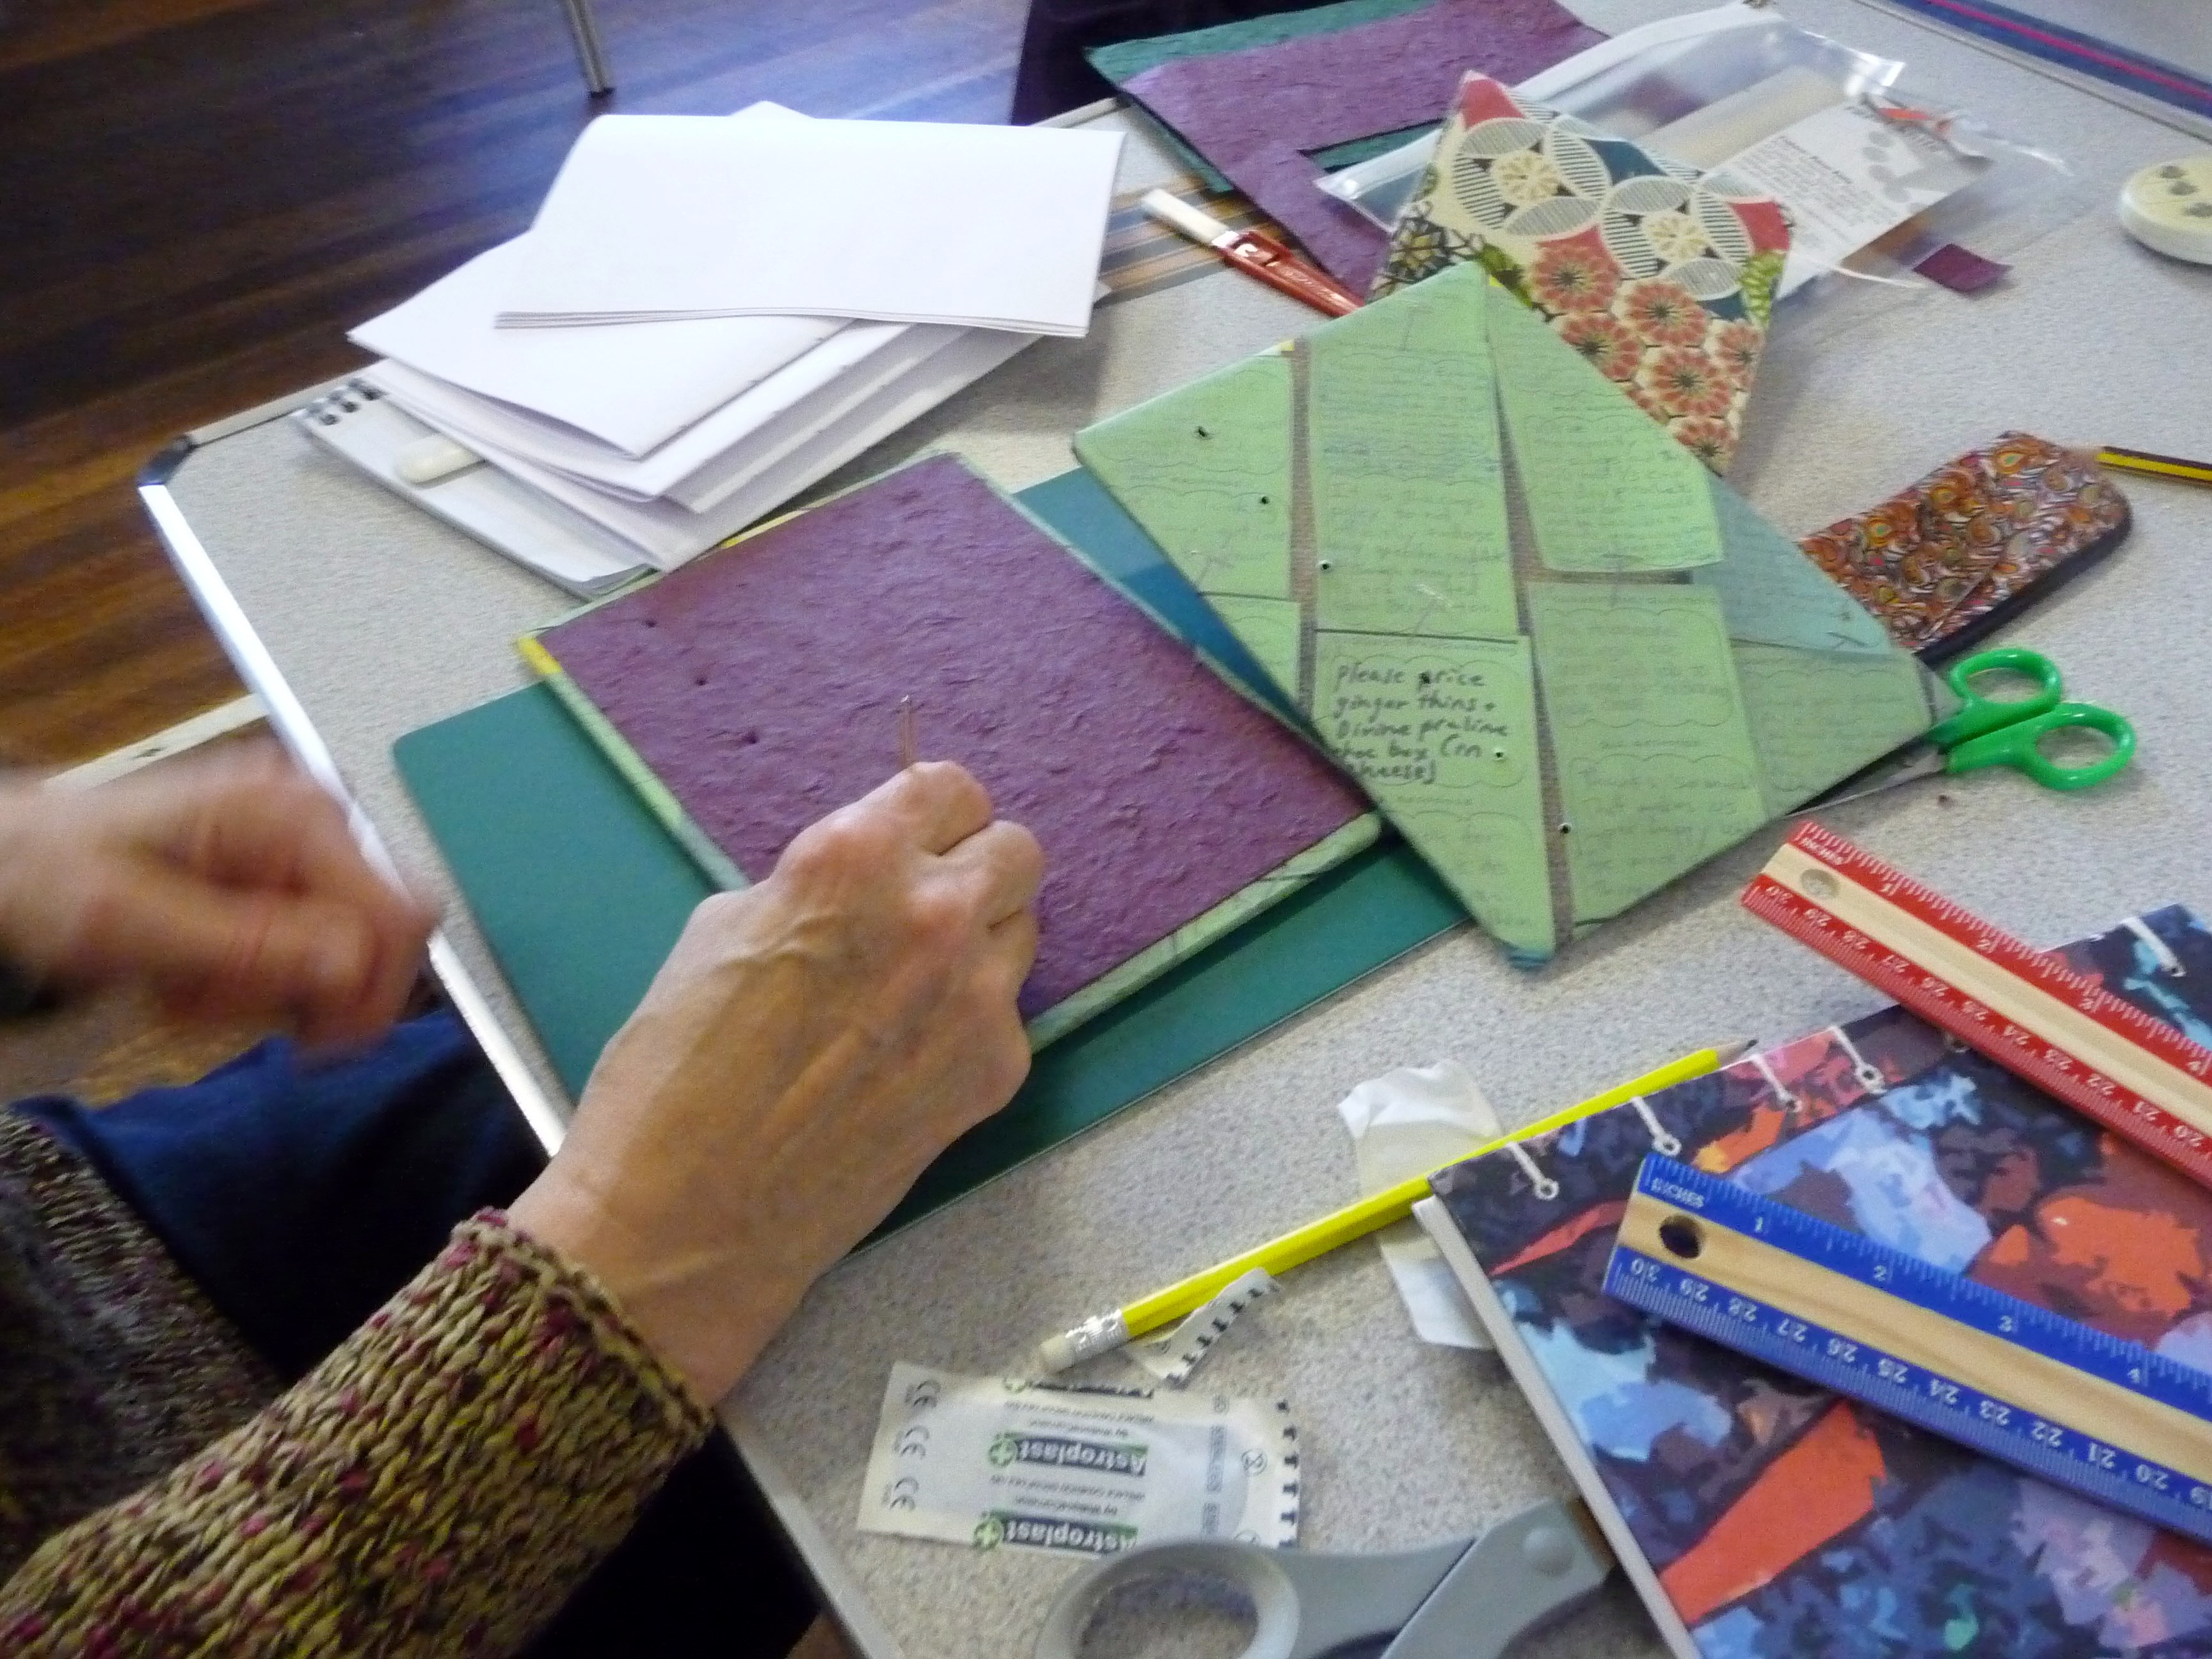 Bookbinding workshop- punching holes for the stitching